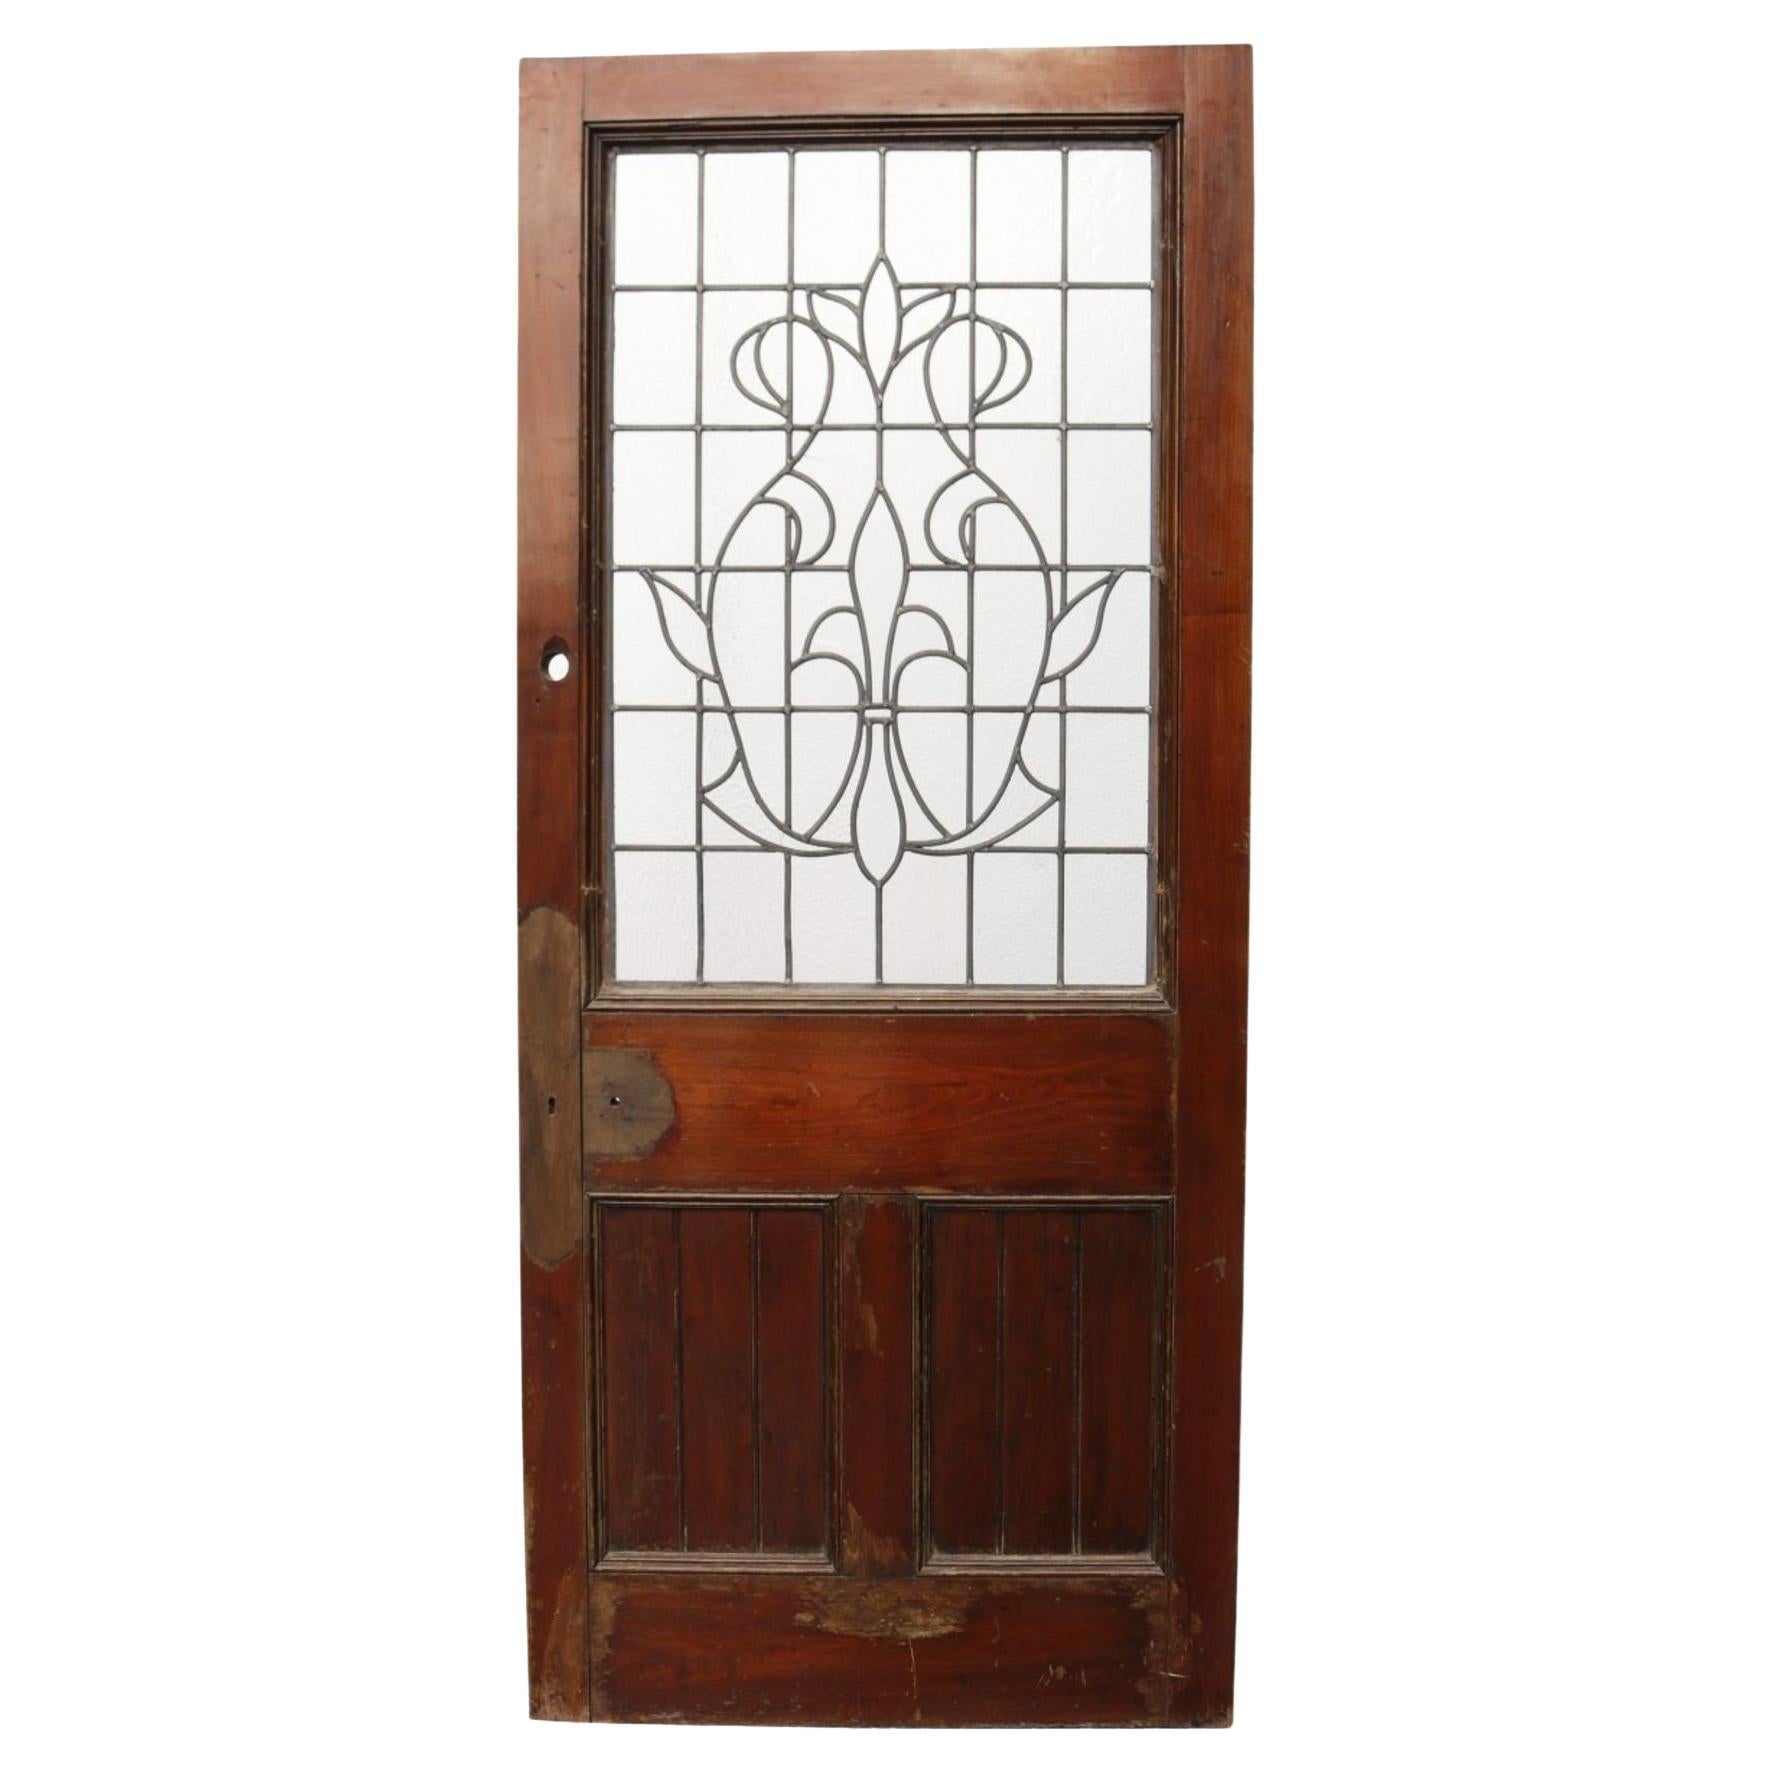 Antique Mahogany Leaded Glass Door For Sale